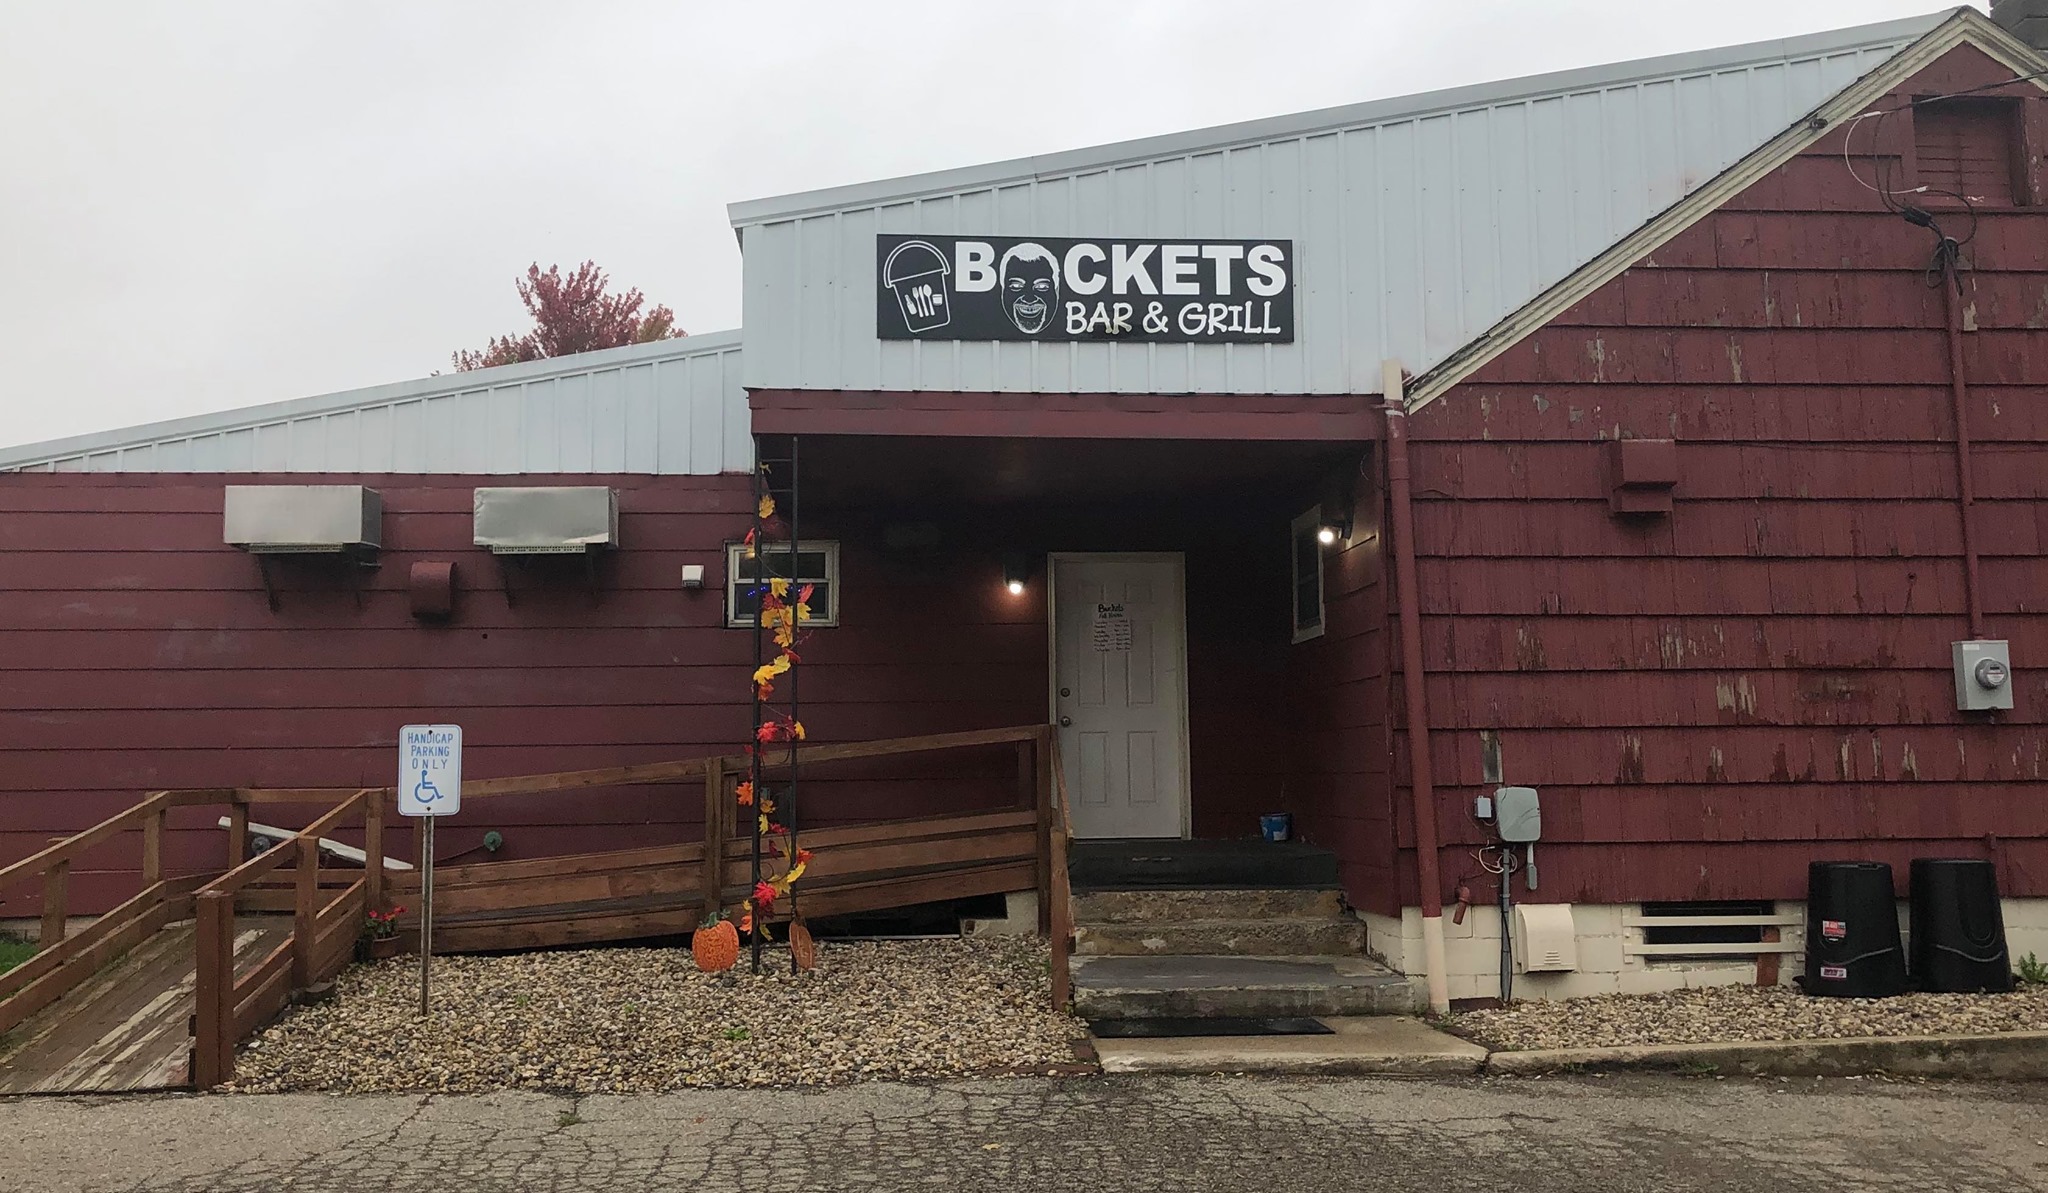 Buckets Bar & Grill serving it up to Winnebago County Photo